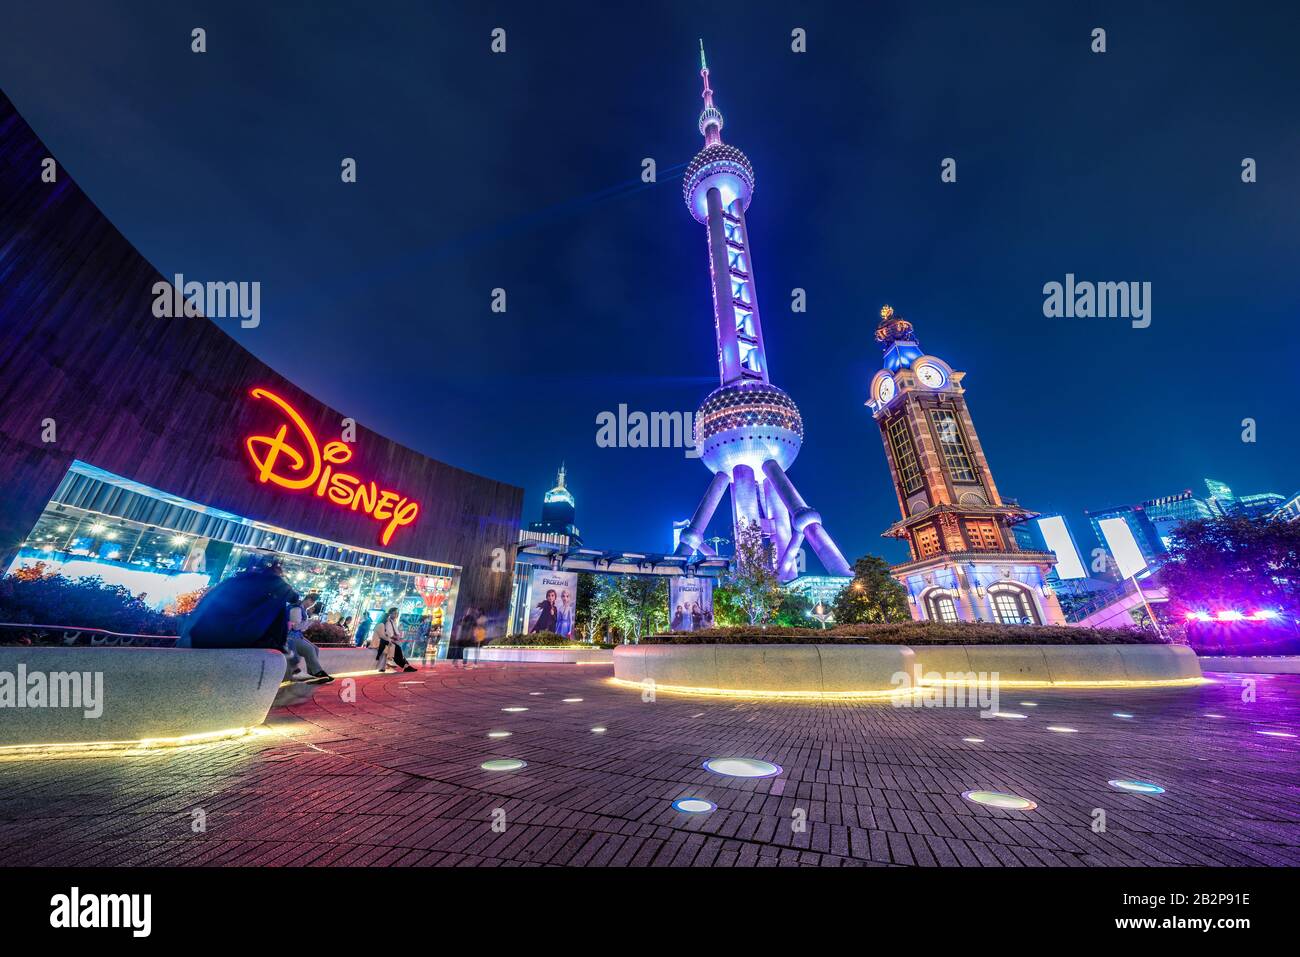 SHANGHAI, CHINA, OCTOBER 30: Night view of the Disney store with the Oriental Pearl Tower in the Lujiazui financial district on October 30, 2019 in Sh Stock Photo